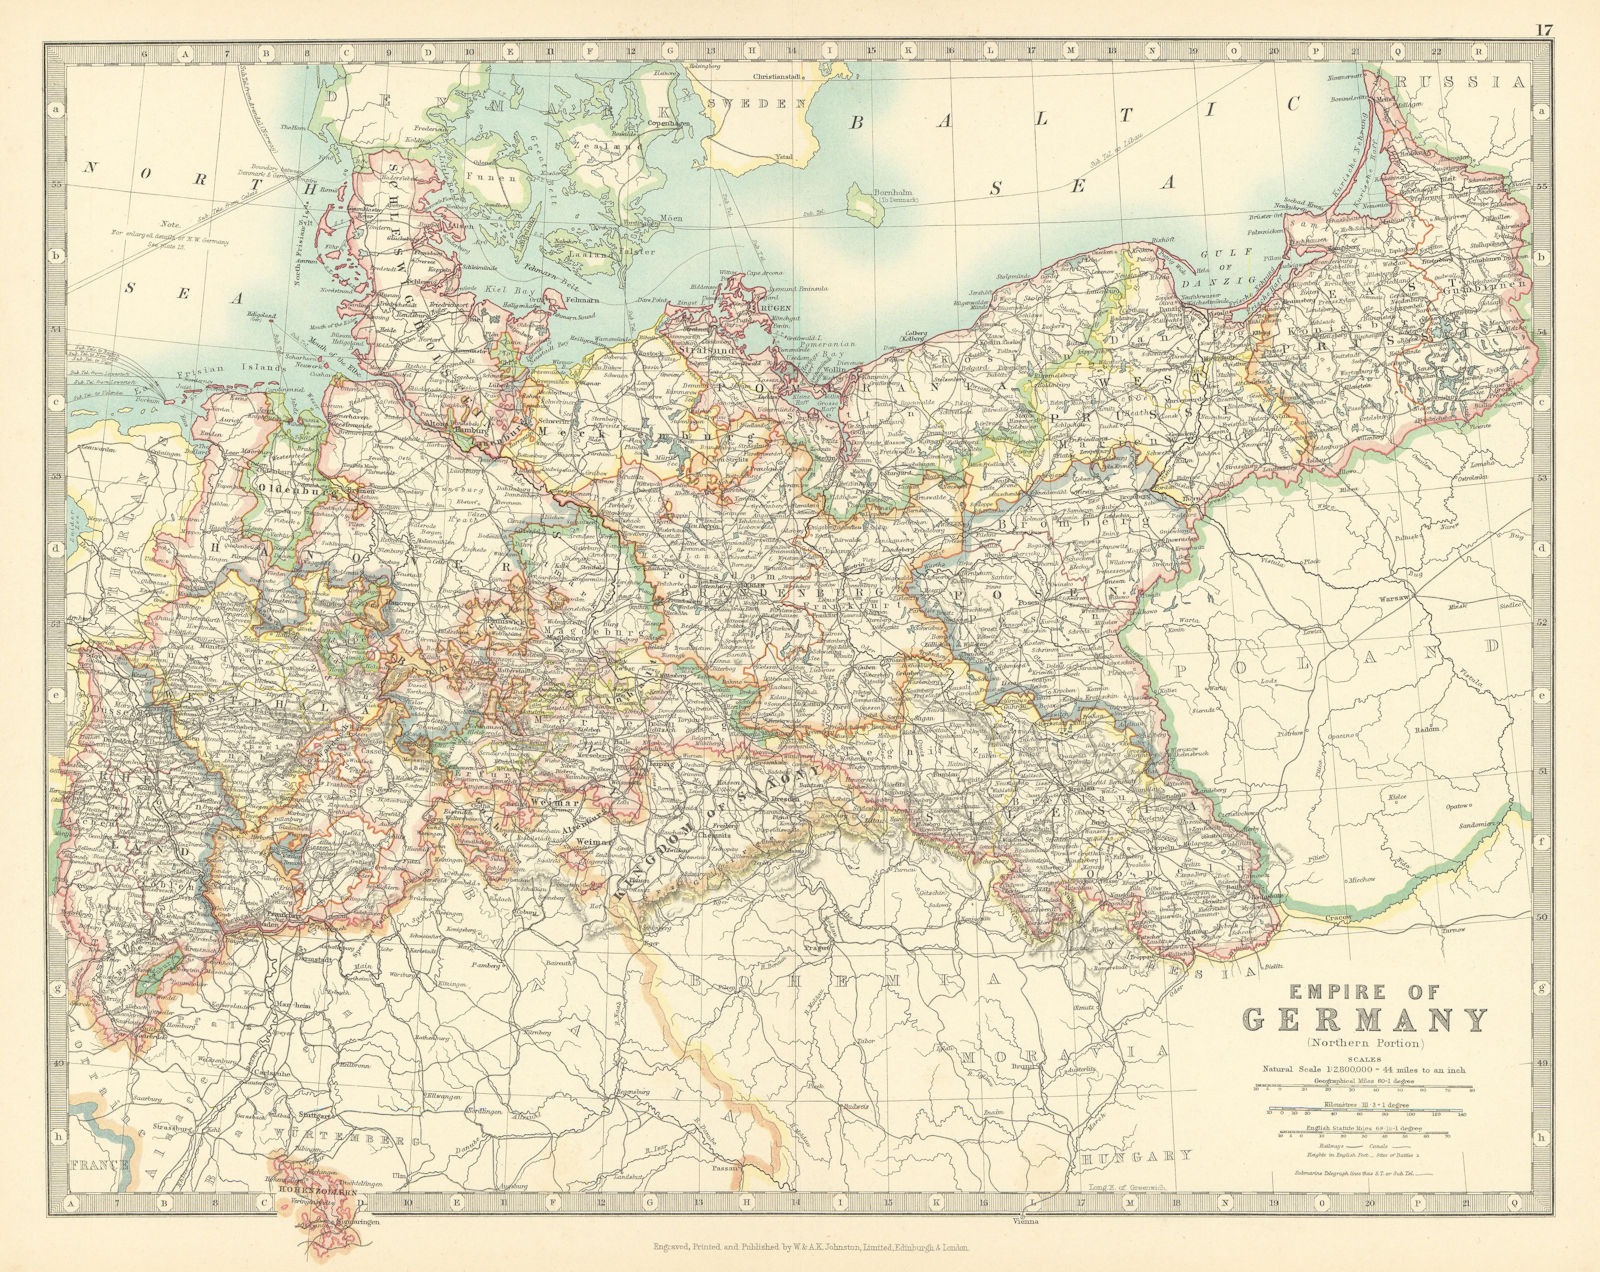 Associate Product GERMAN EMPIRE NORTH showing important battlefield & dates. JOHNSTON 1911 map